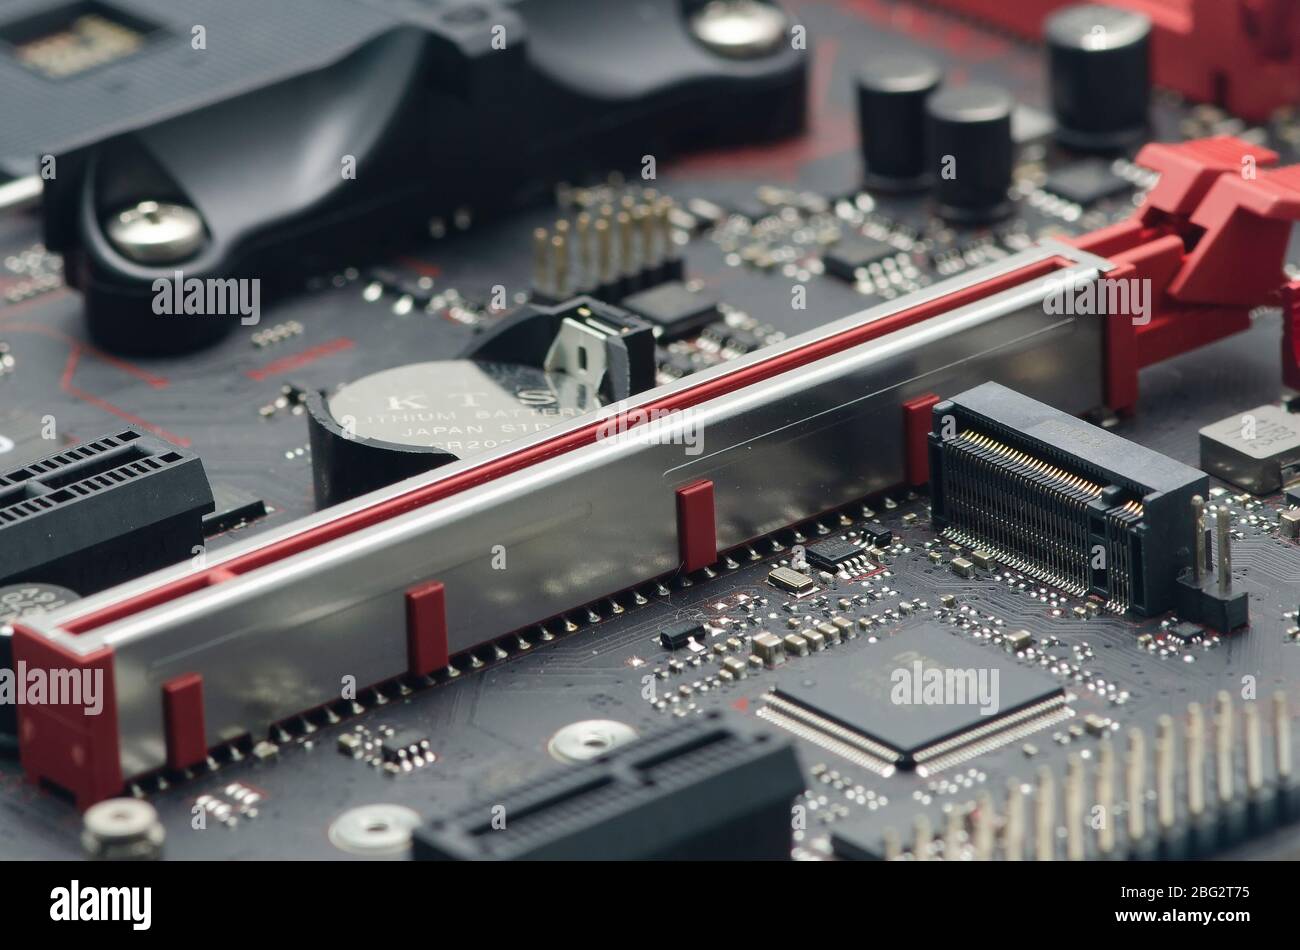 close-up pcie x16 slot on computer msi mainboard Stock Photo